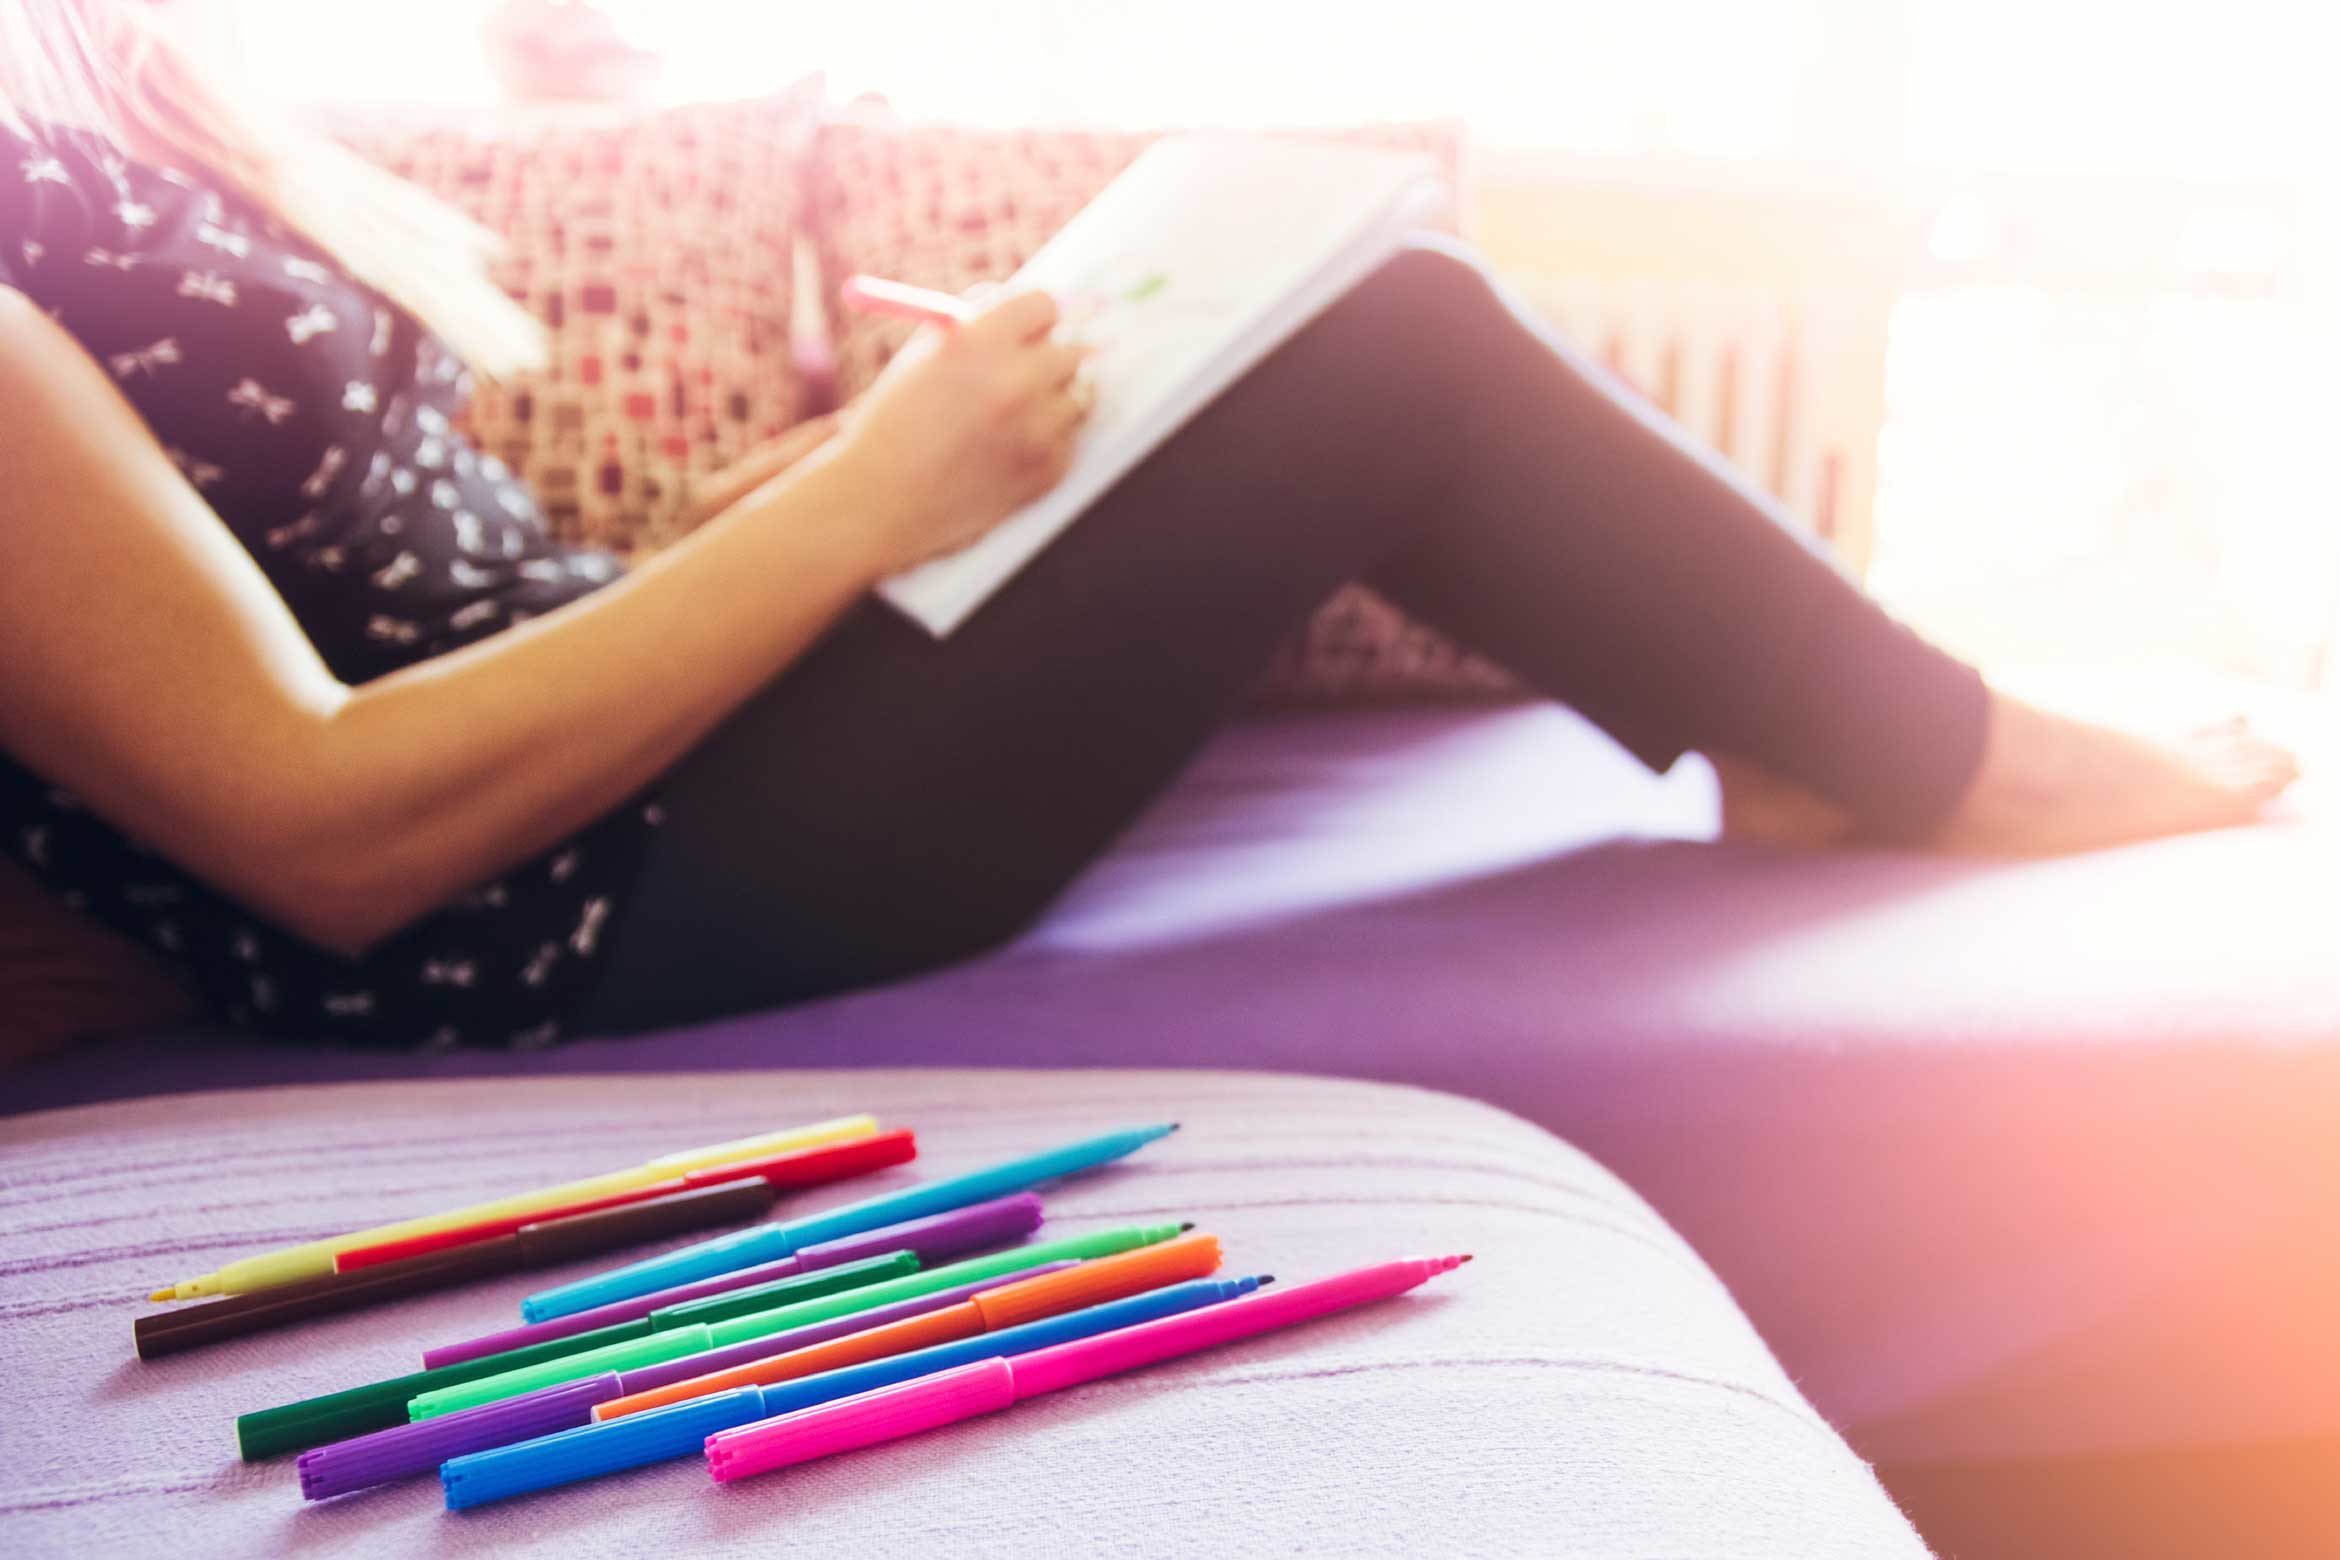 Coloring Books for Adults: 8 Benefits of Coloring | The Healthy